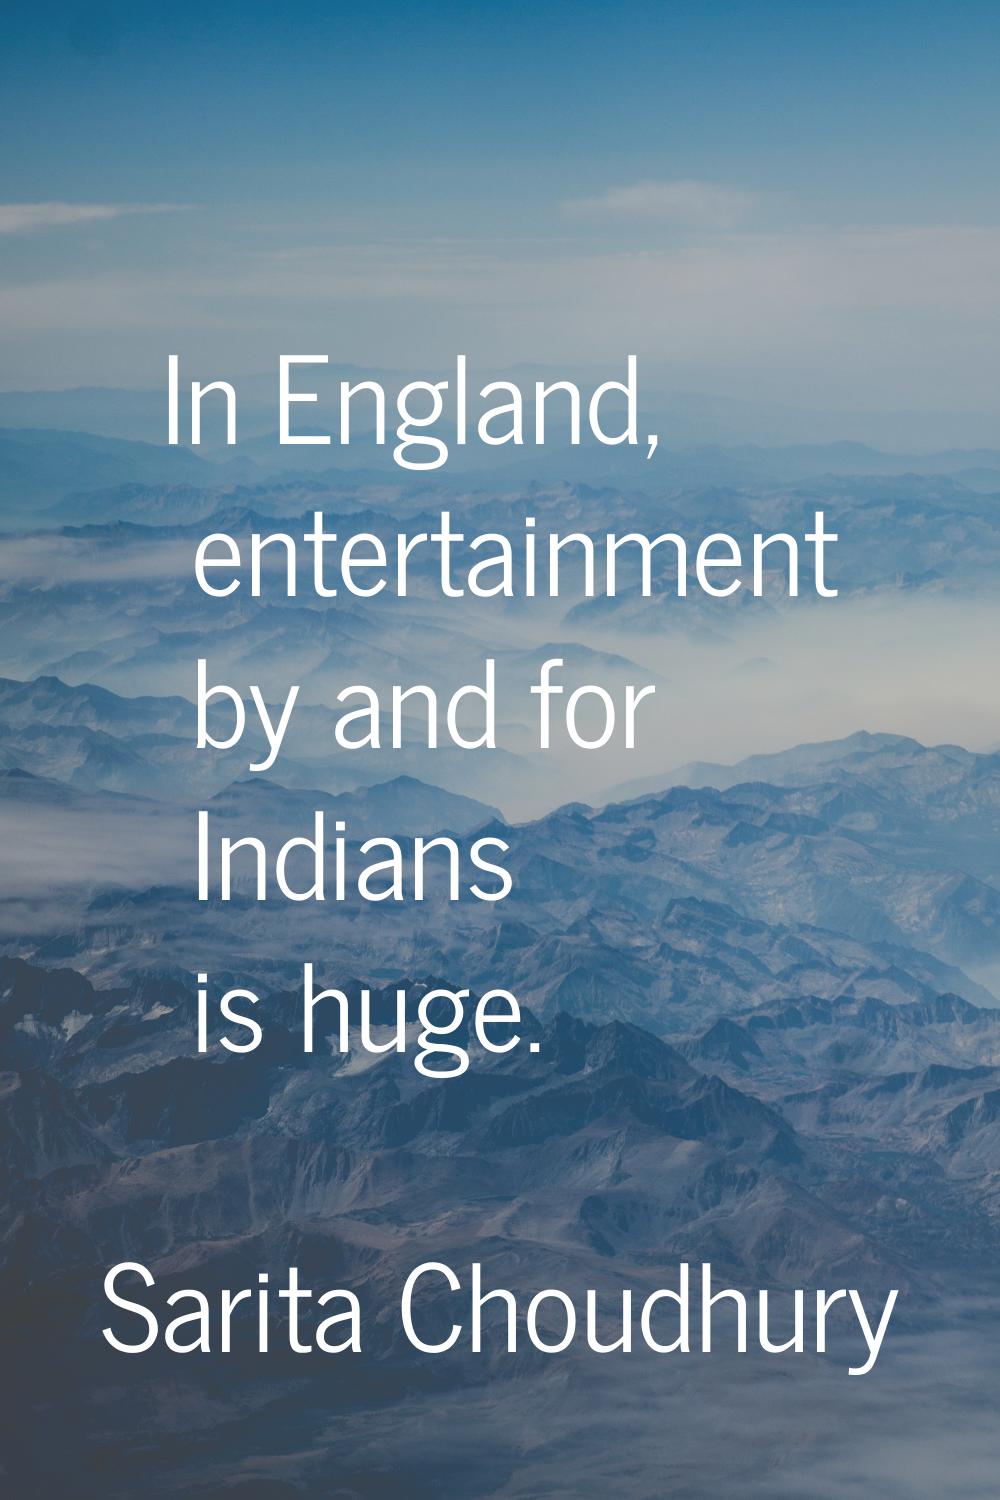 In England, entertainment by and for Indians is huge.